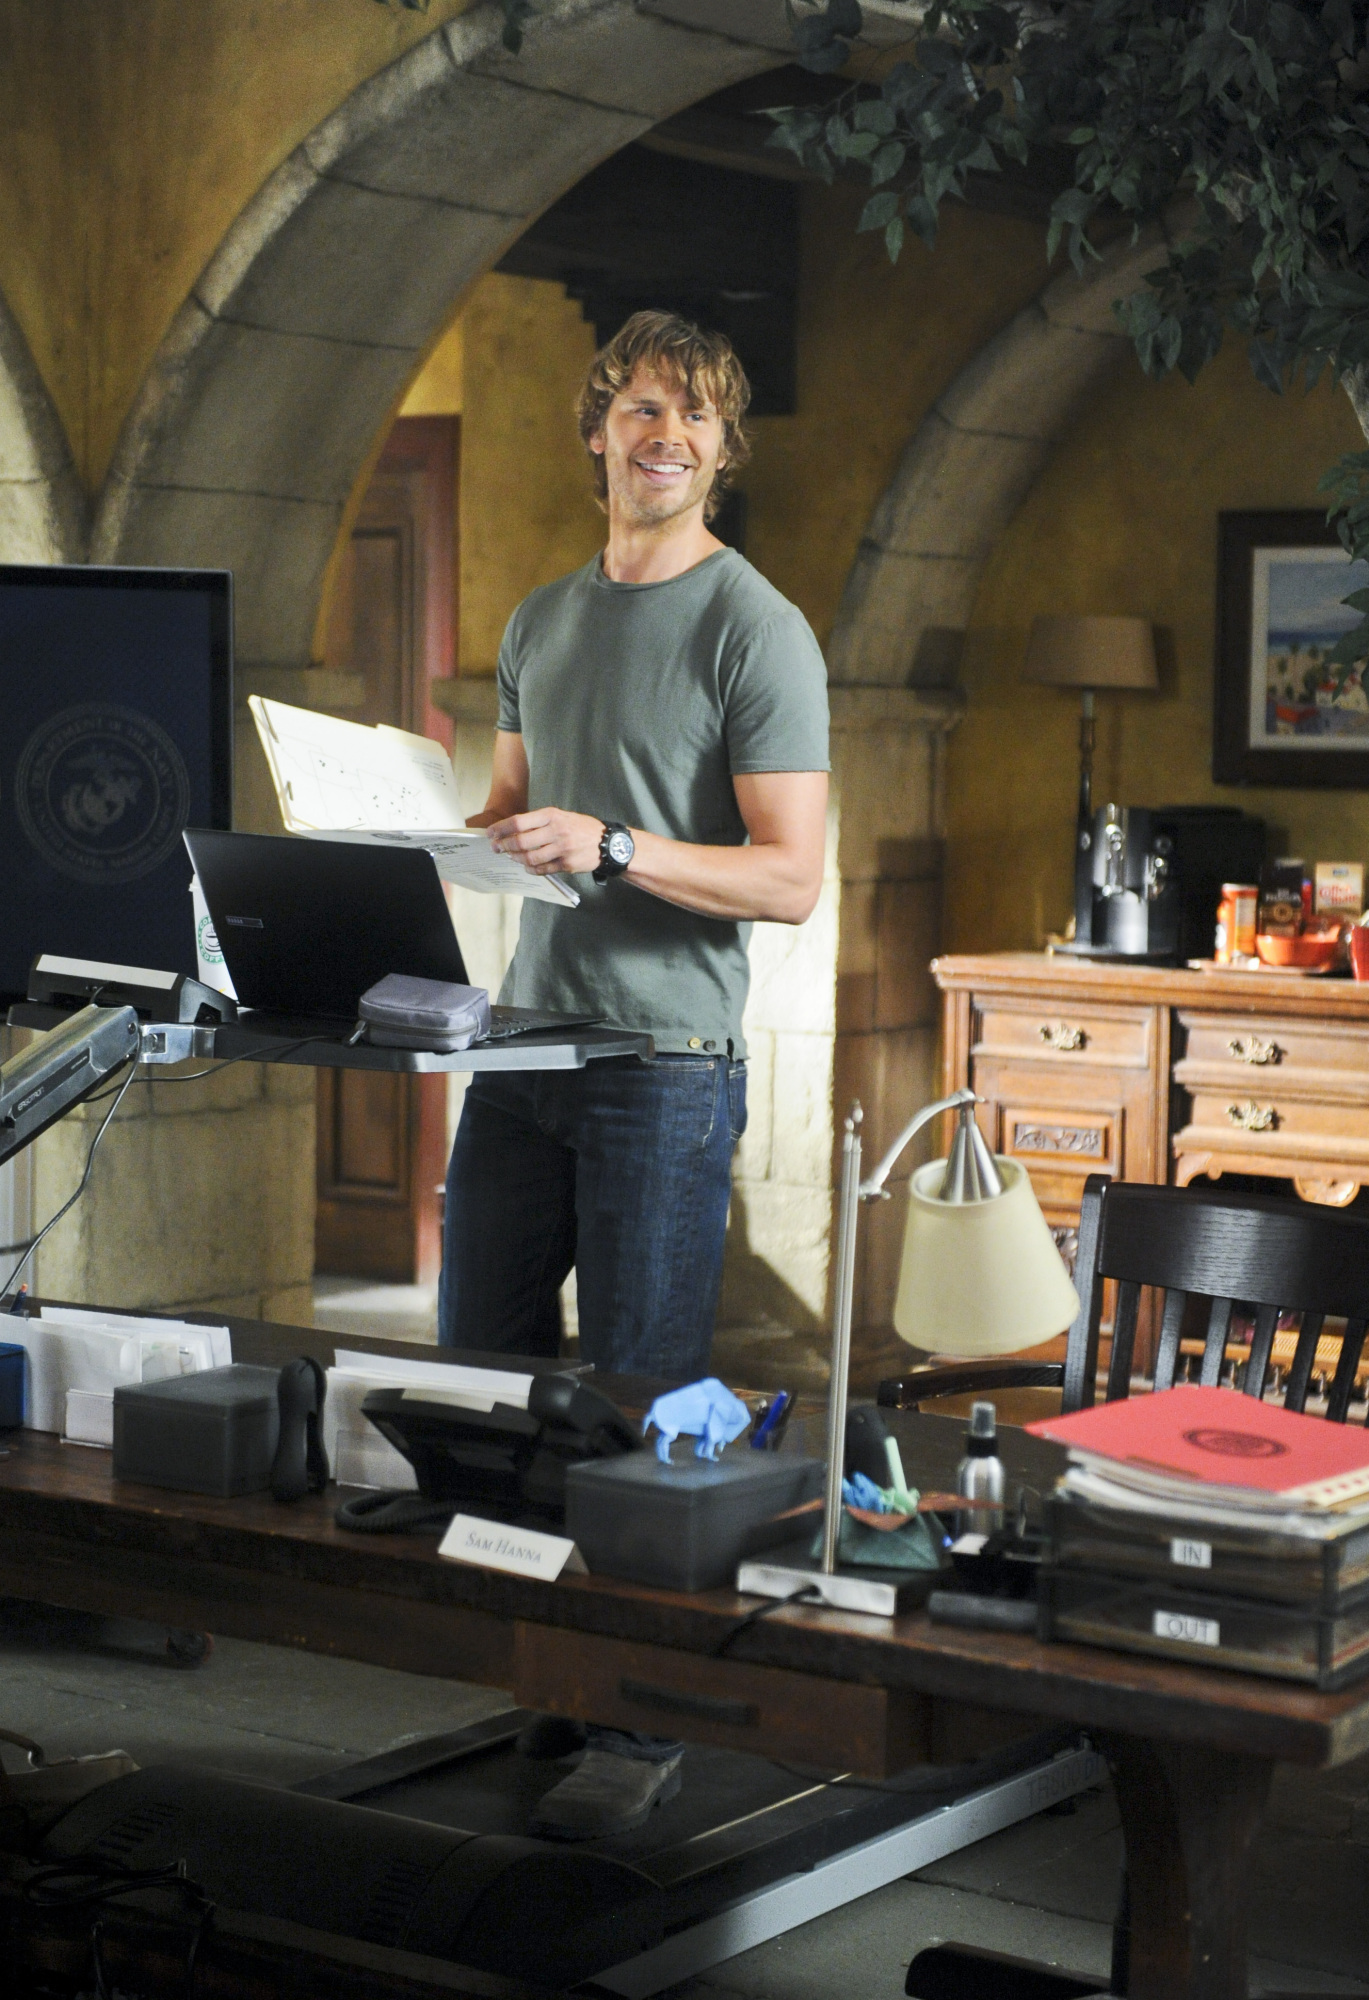 NCIS Los Angeles Season Five Episode Four "Big Brother" Promo Picture